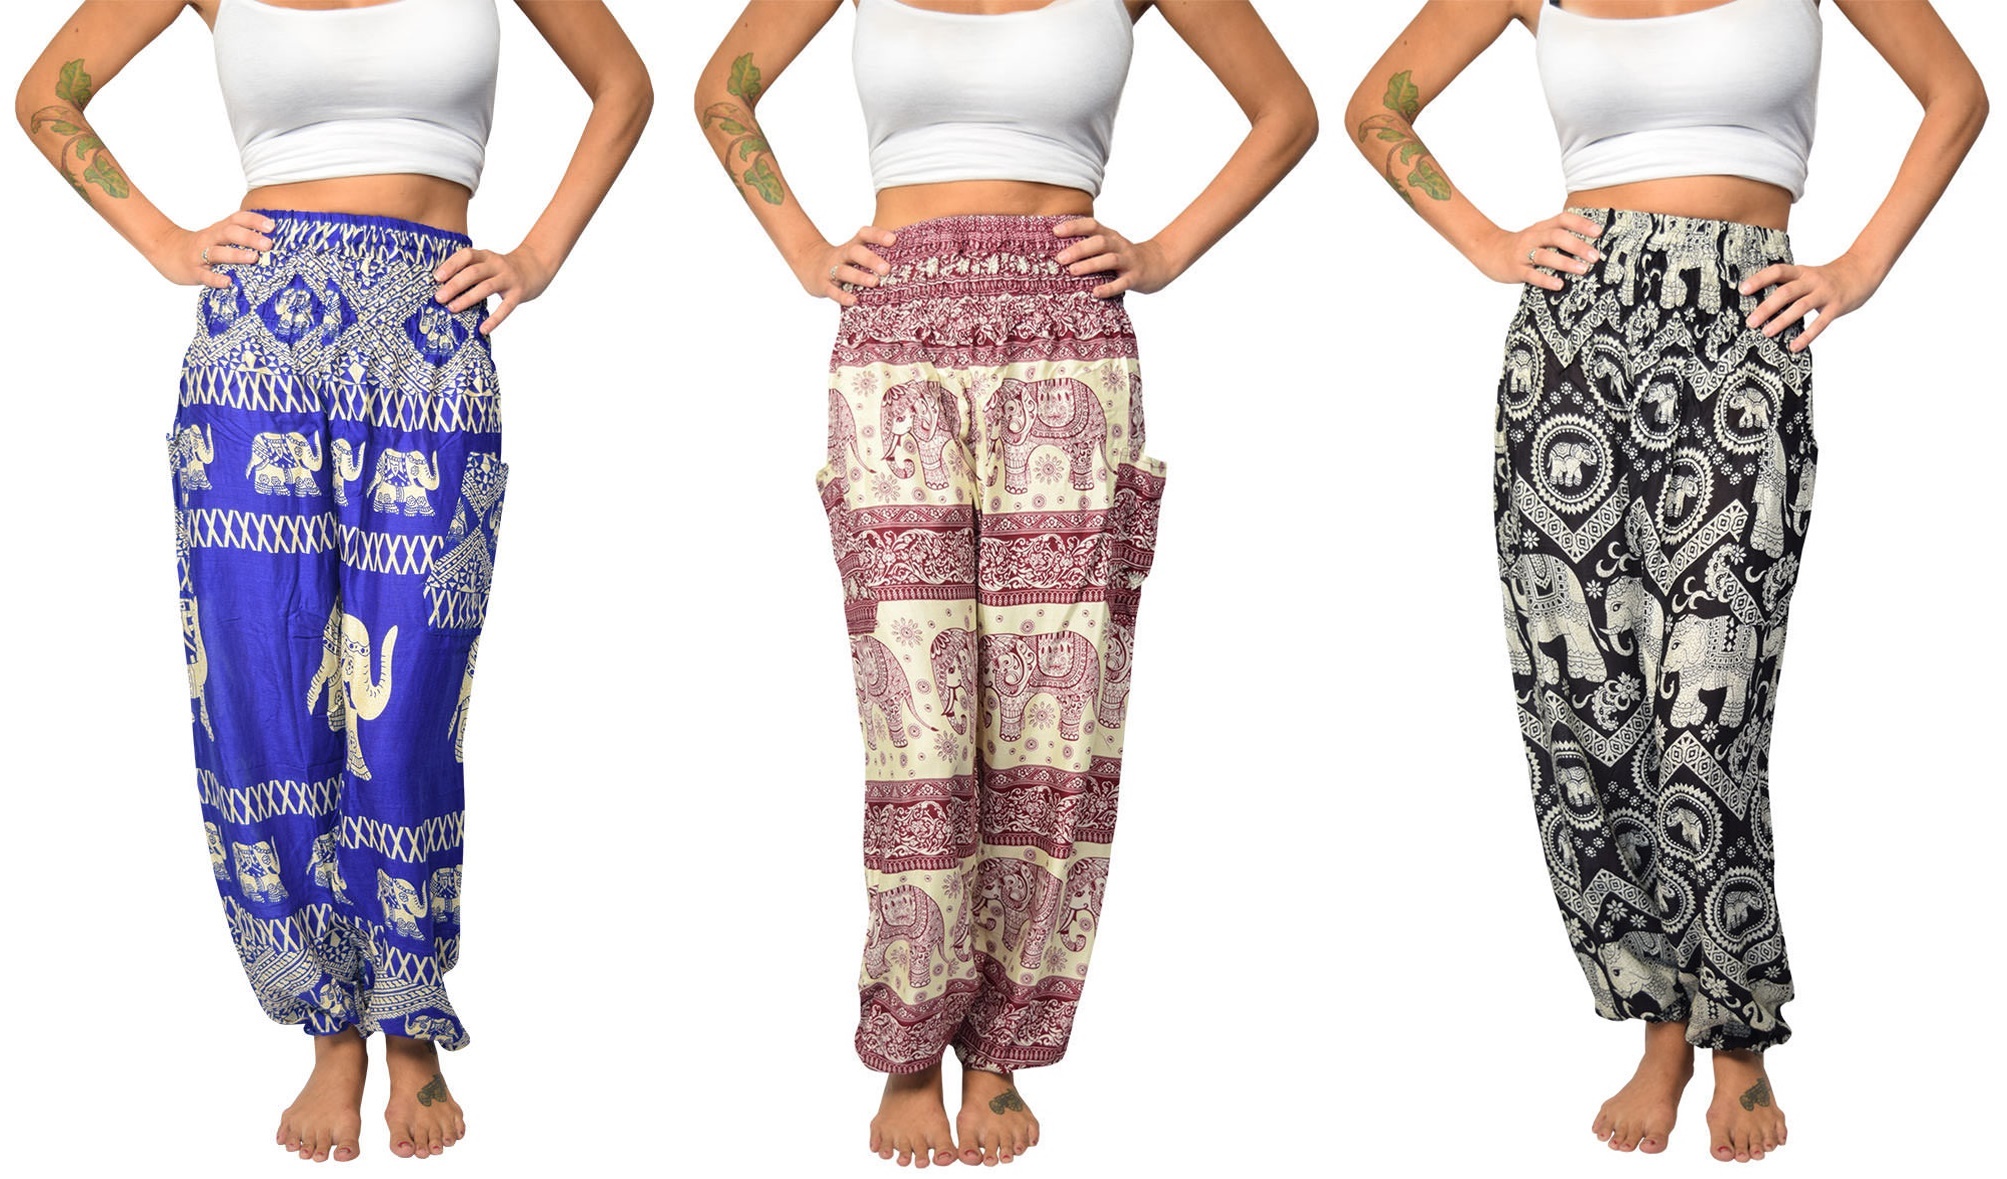 The Elephant Pants: Look Good While Saving the Elephants this